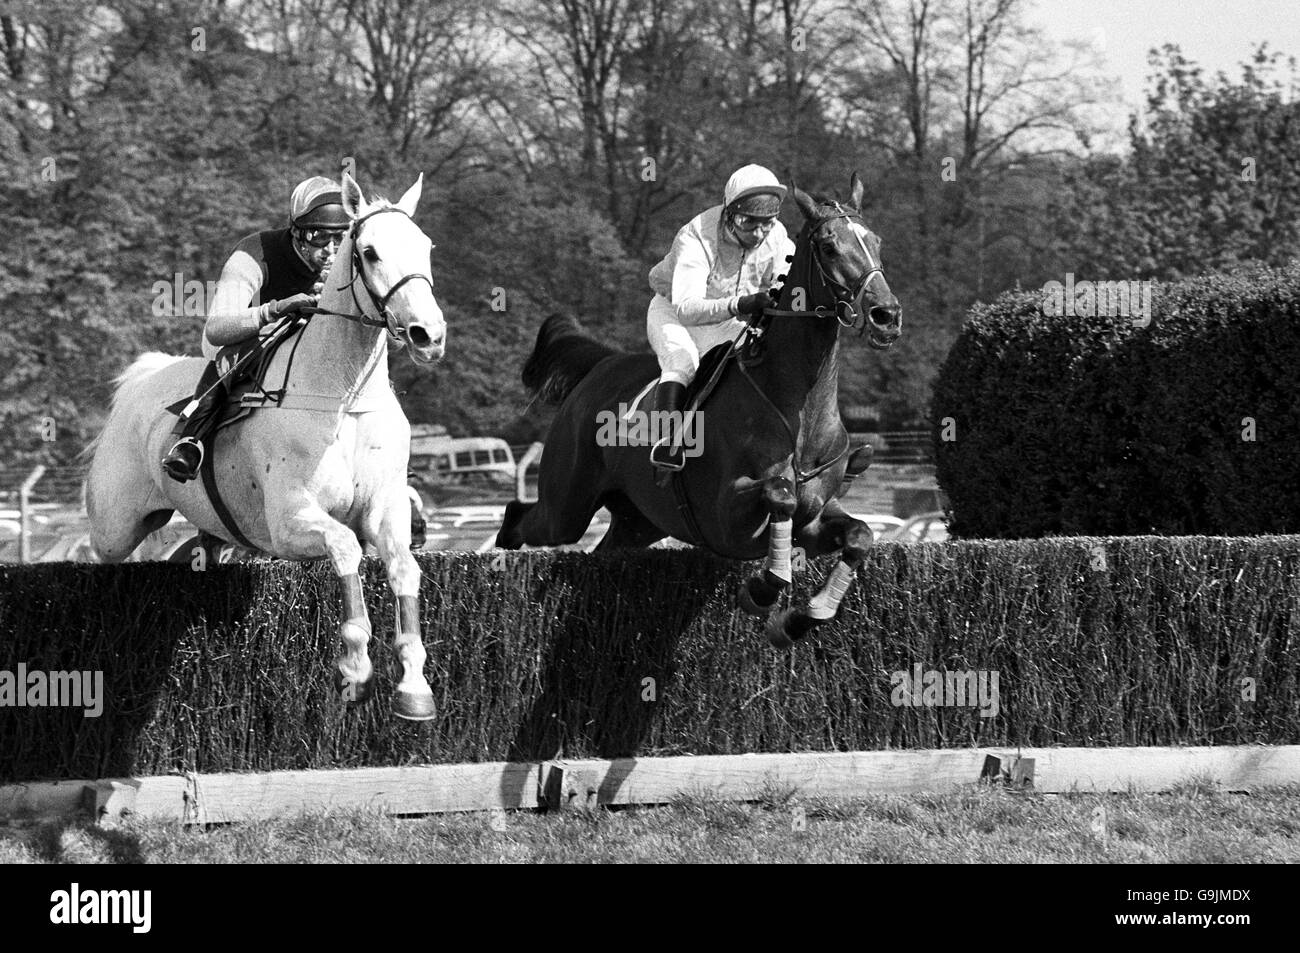 Desert Orchid (left) with jockey Simon Sherwood, jumps the last half a stride ahead of second place Kildimo, Jim Frost up, before Richard Burridge's grey gelding came home to win the Whitbread Gold Cup at Sandown Park. Stock Photo